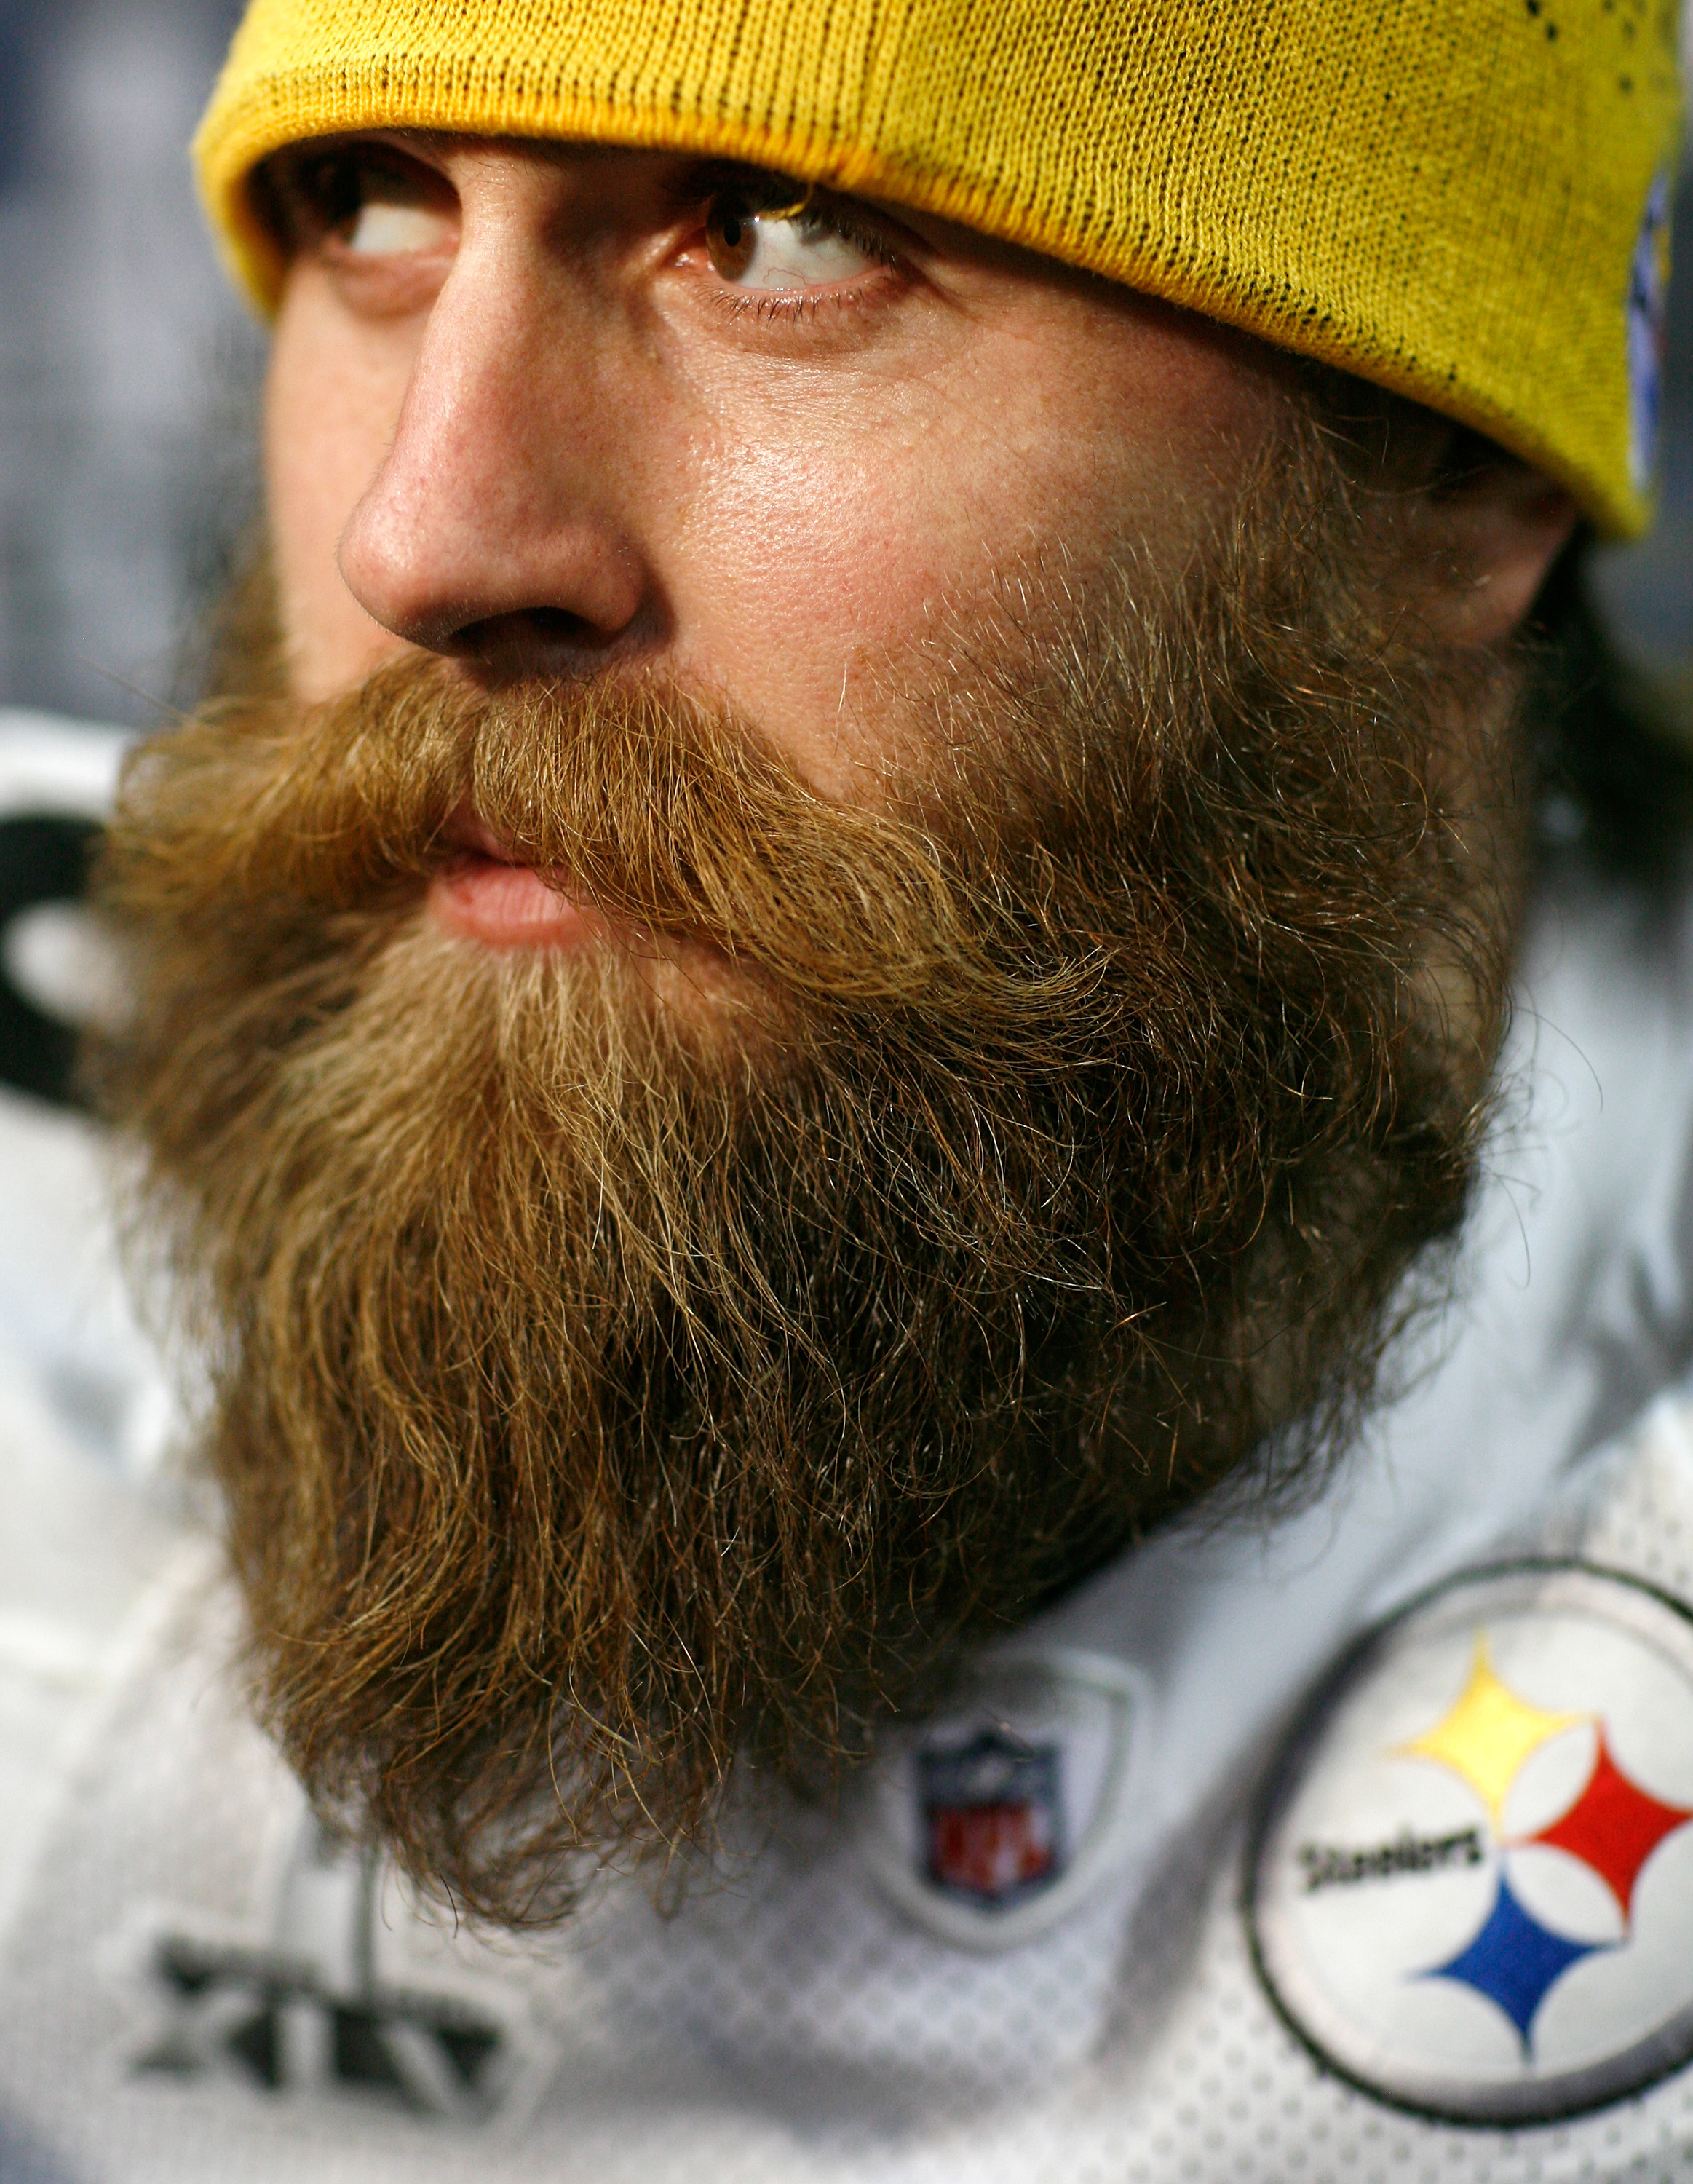 FORT WORTH, TX - FEBRUARY 02:  Defensive end Brett Keisel #99 of the Pittsburgh Steelers talks with the media on February 2, 2011 in Fort Worth, Texas. The Pittsburgh Steelers will play the Green Bay Packers in Super Bowl XLV on February 6, 2011 at Cowboy